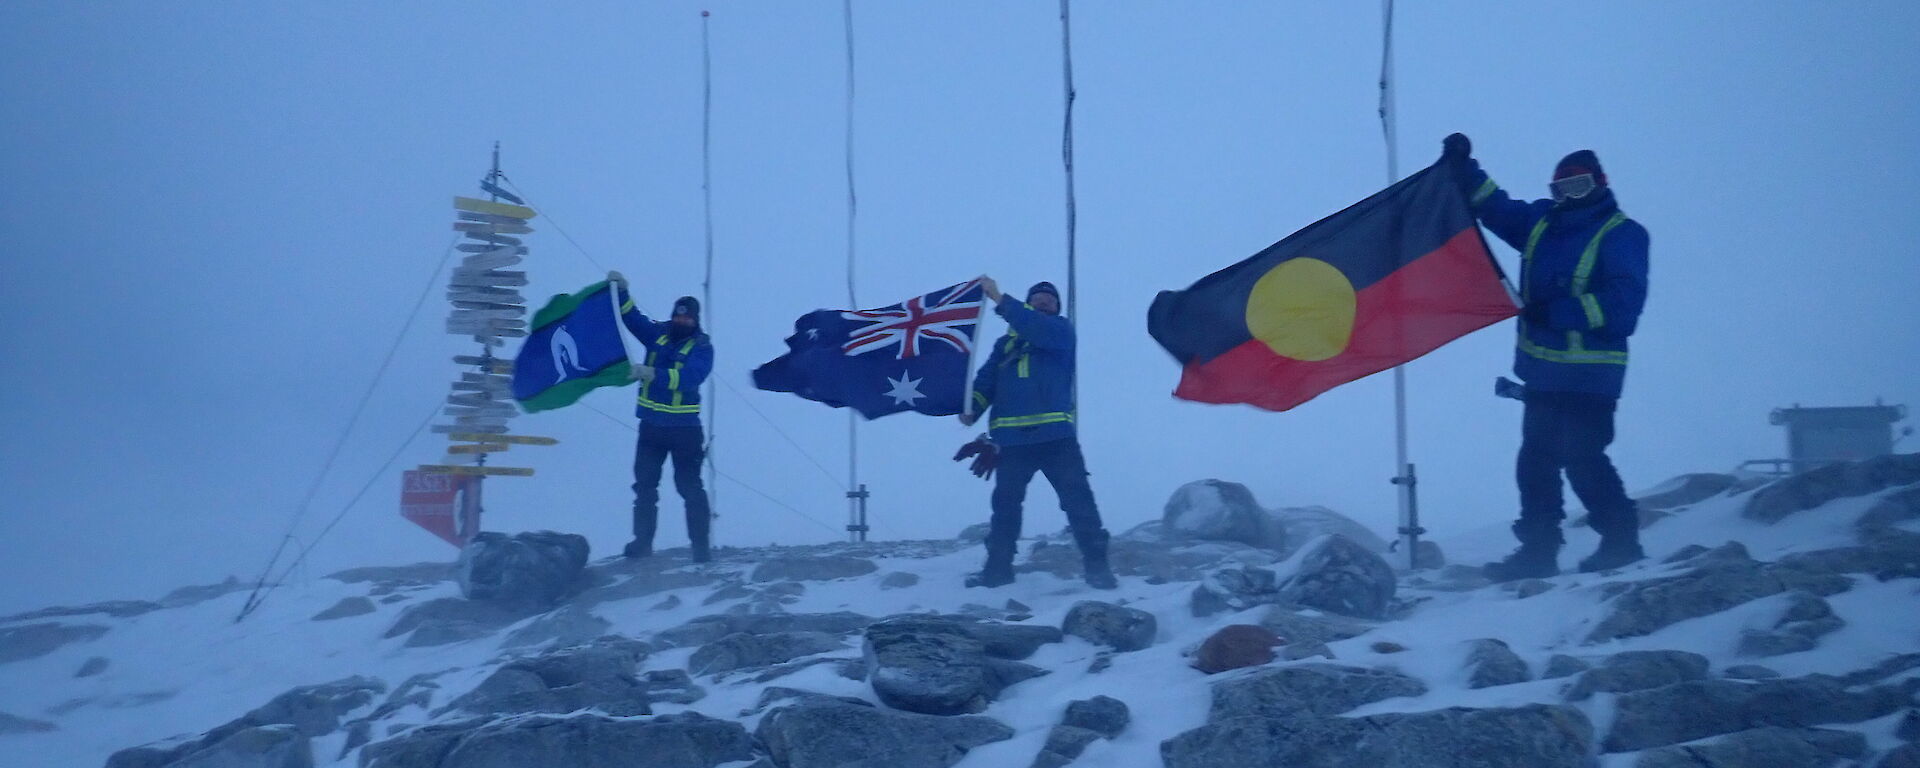 Men standing holding the Torres St Islander flay, Australian National Flag, and Aboriginal Flag in the strong wind. Standing on rocky outcrop with three flag poles and casey sign behind